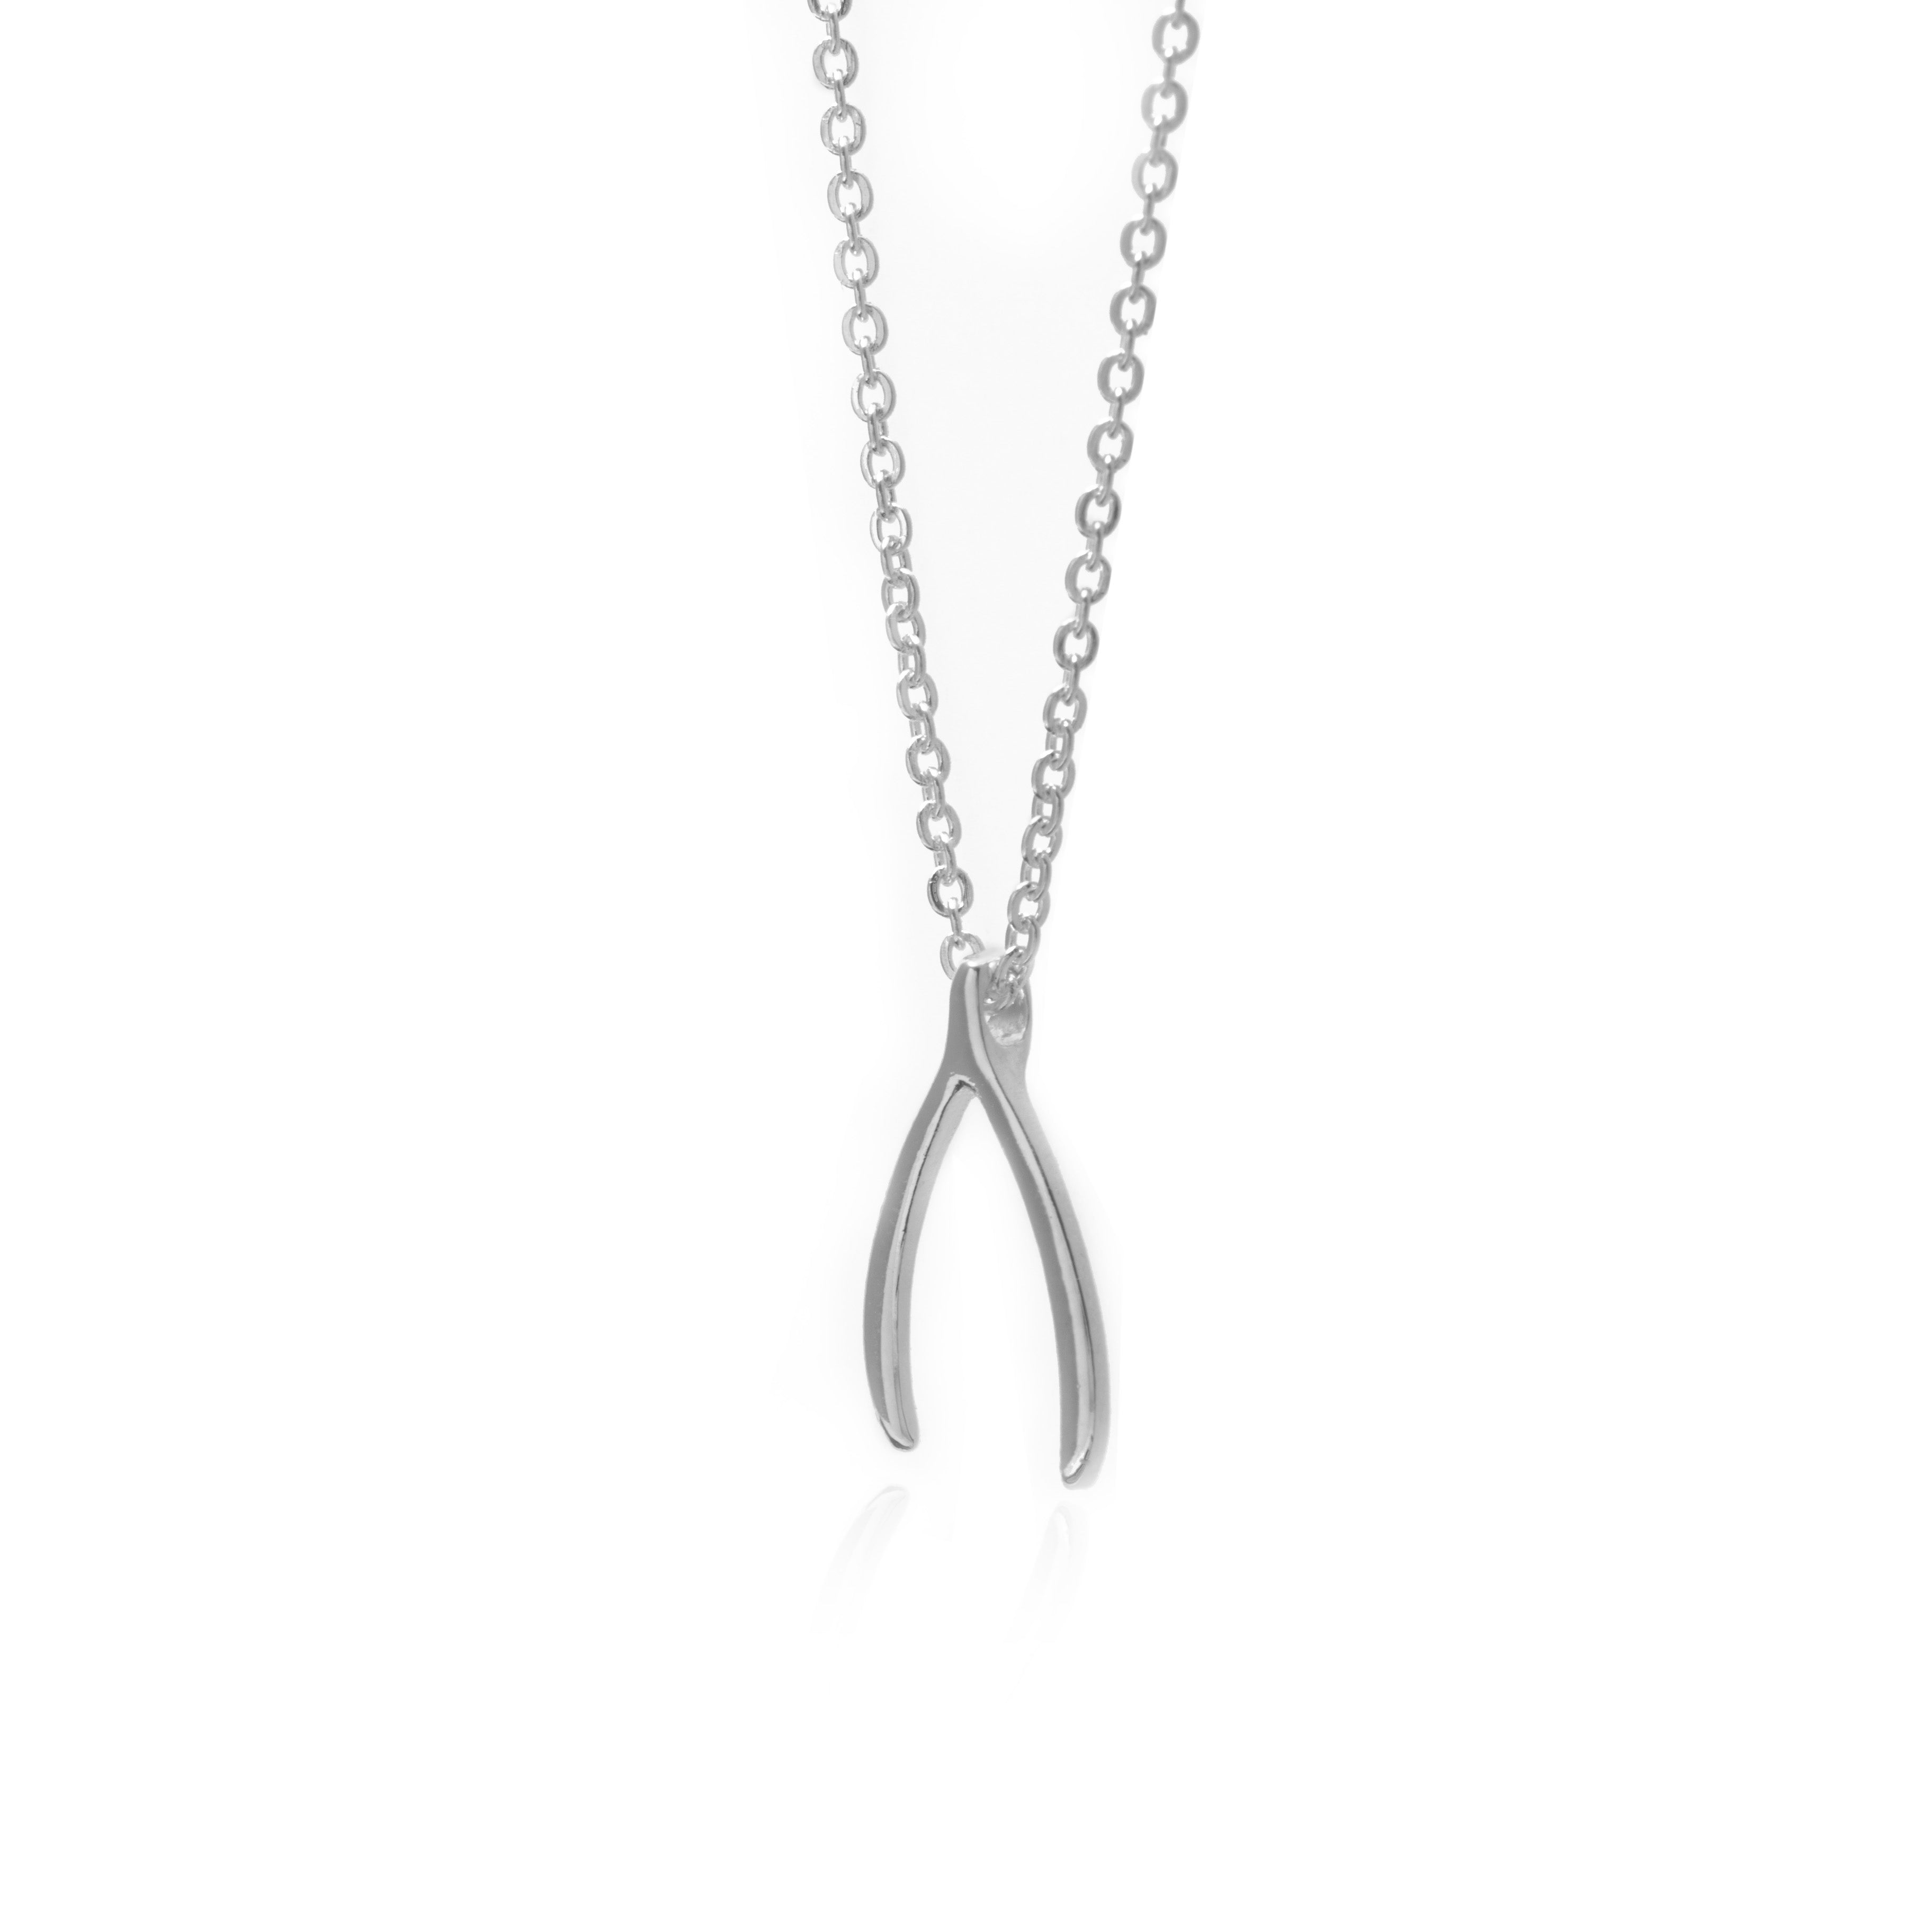 Buy Recycled Sterling Silver Wishbone Necklace Online